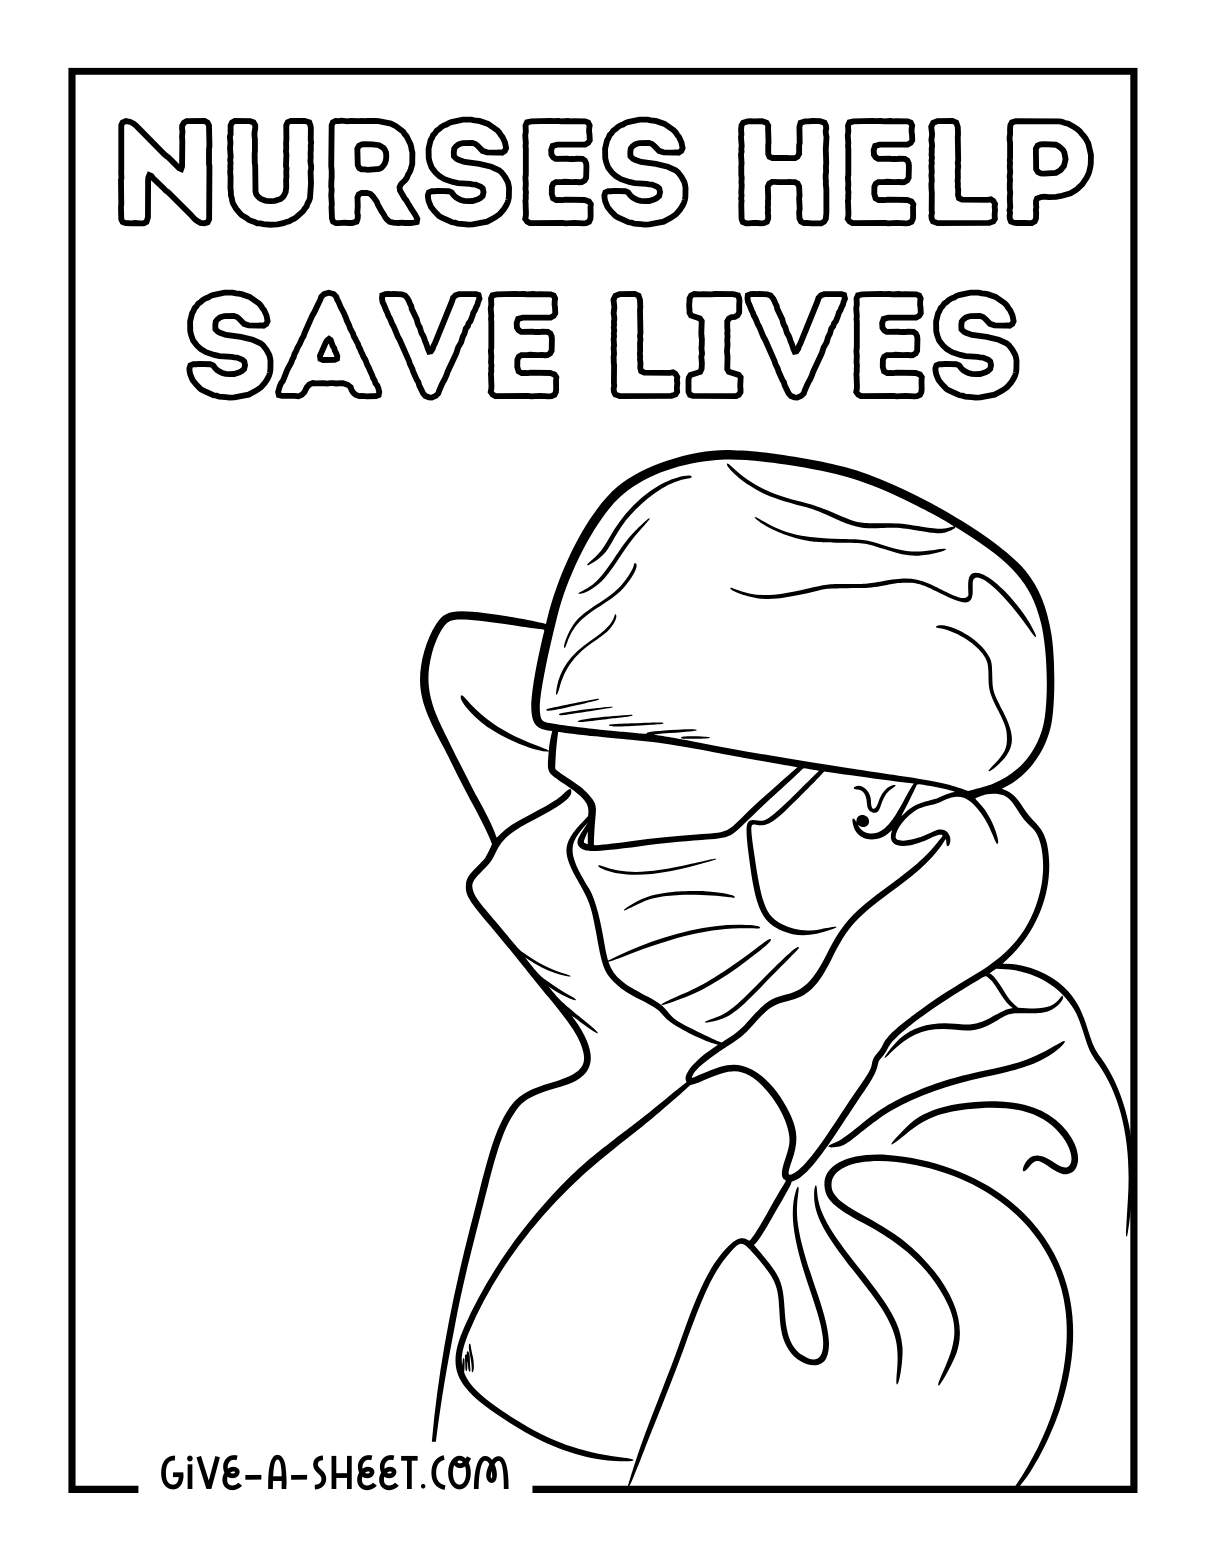 Nurse wearing face mask on operating room coloring page.